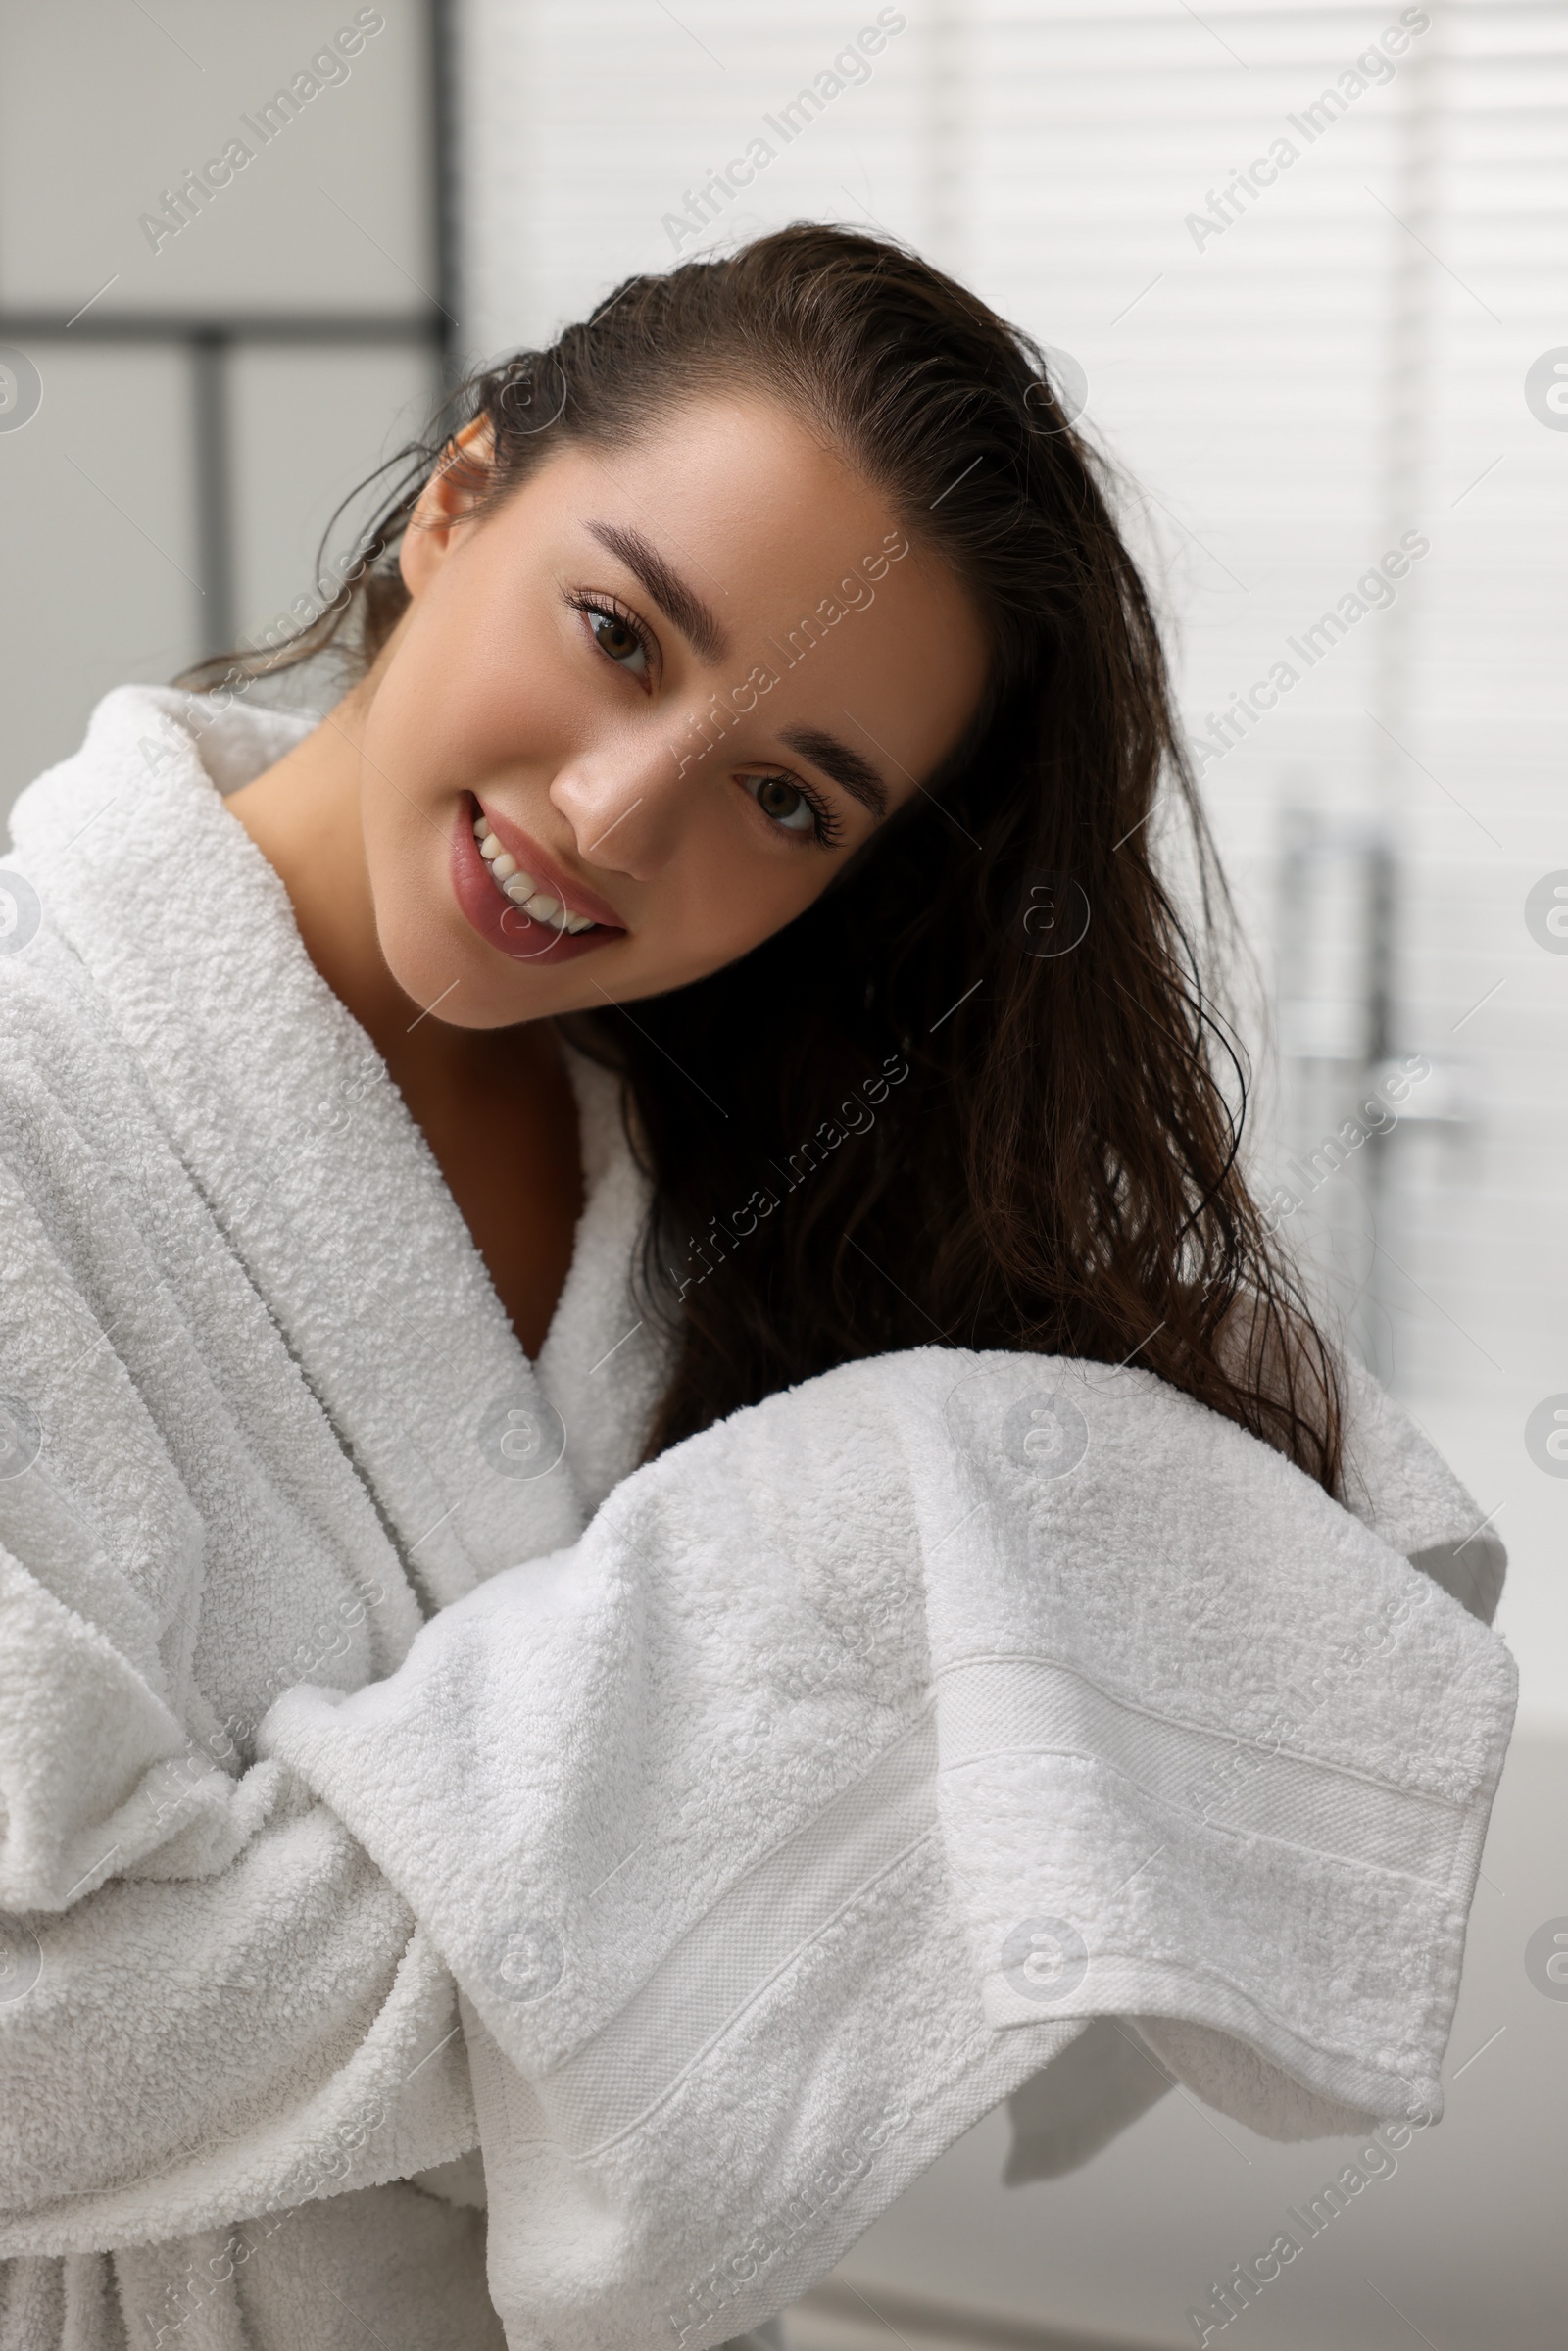 Photo of Smiling woman drying hair with towel after shower in bathroom